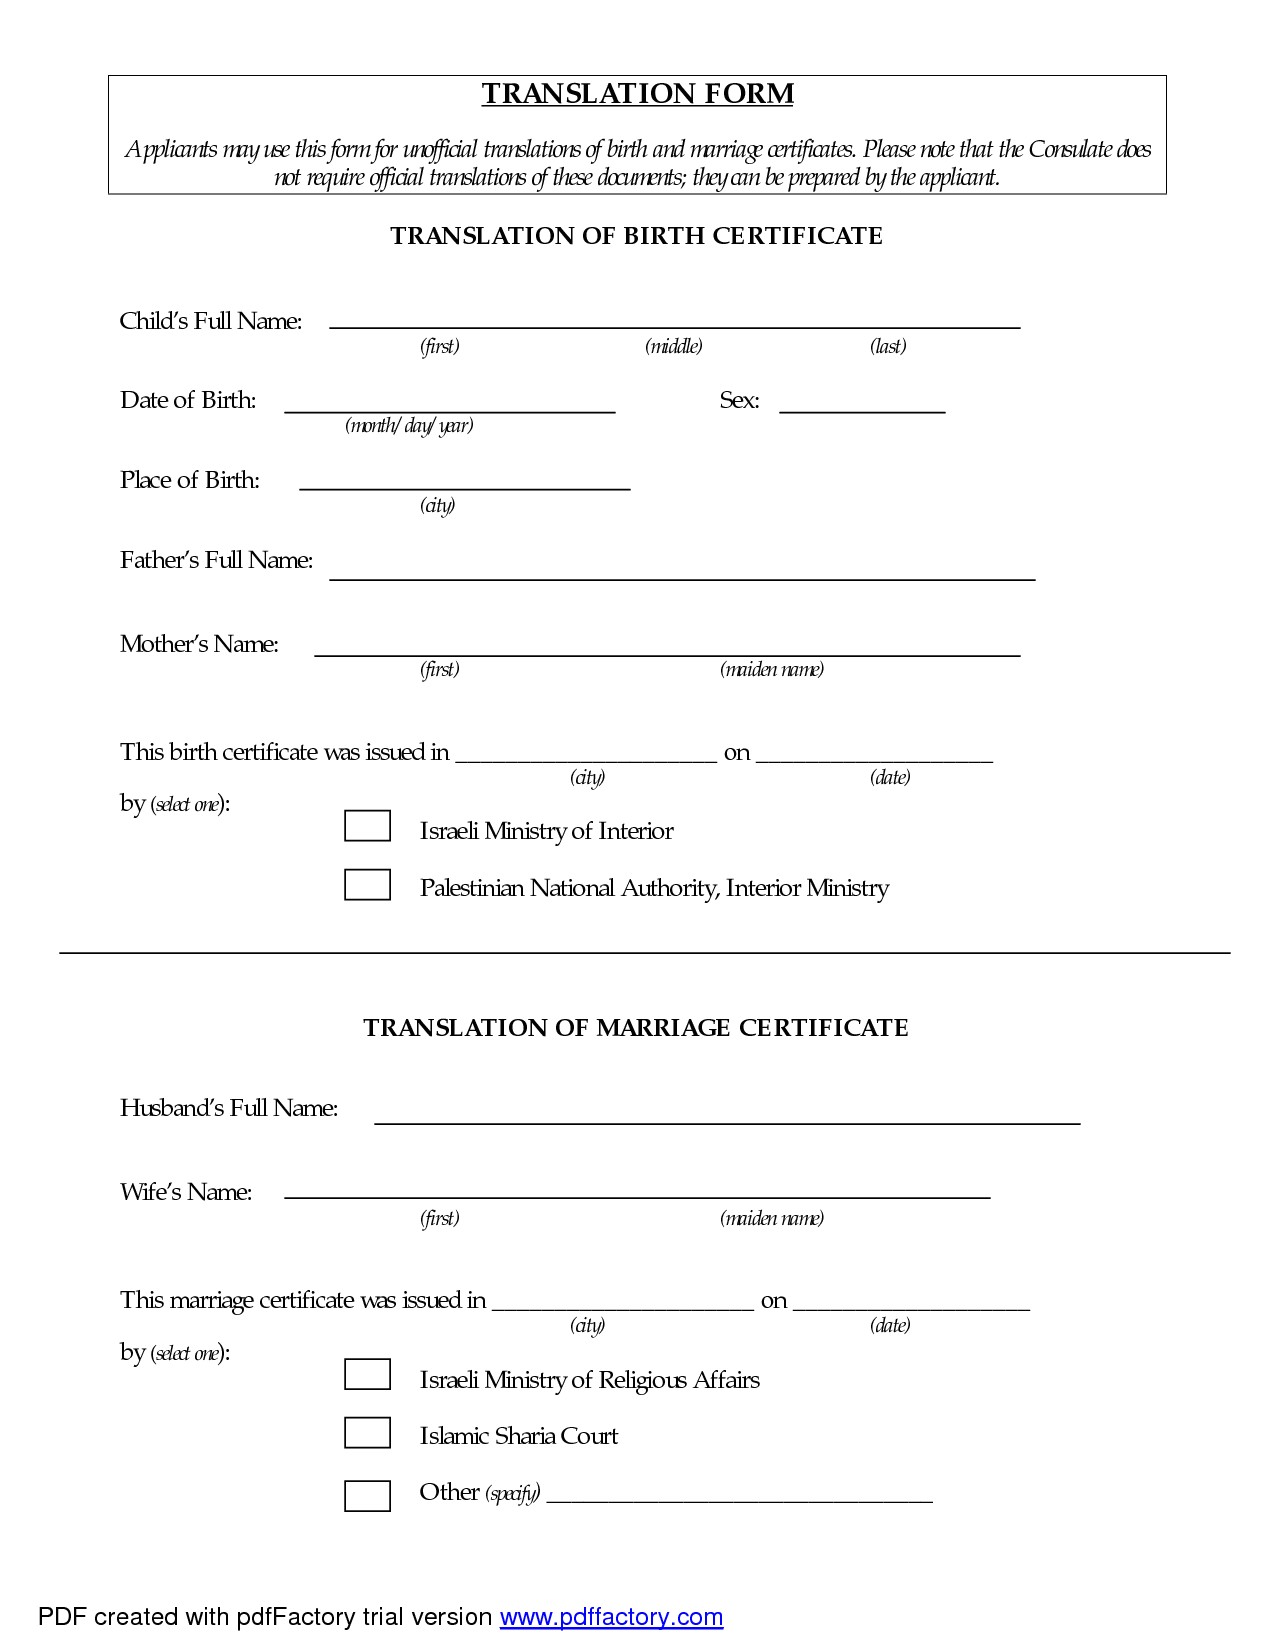 post mexican marriage certificate translation template 492671